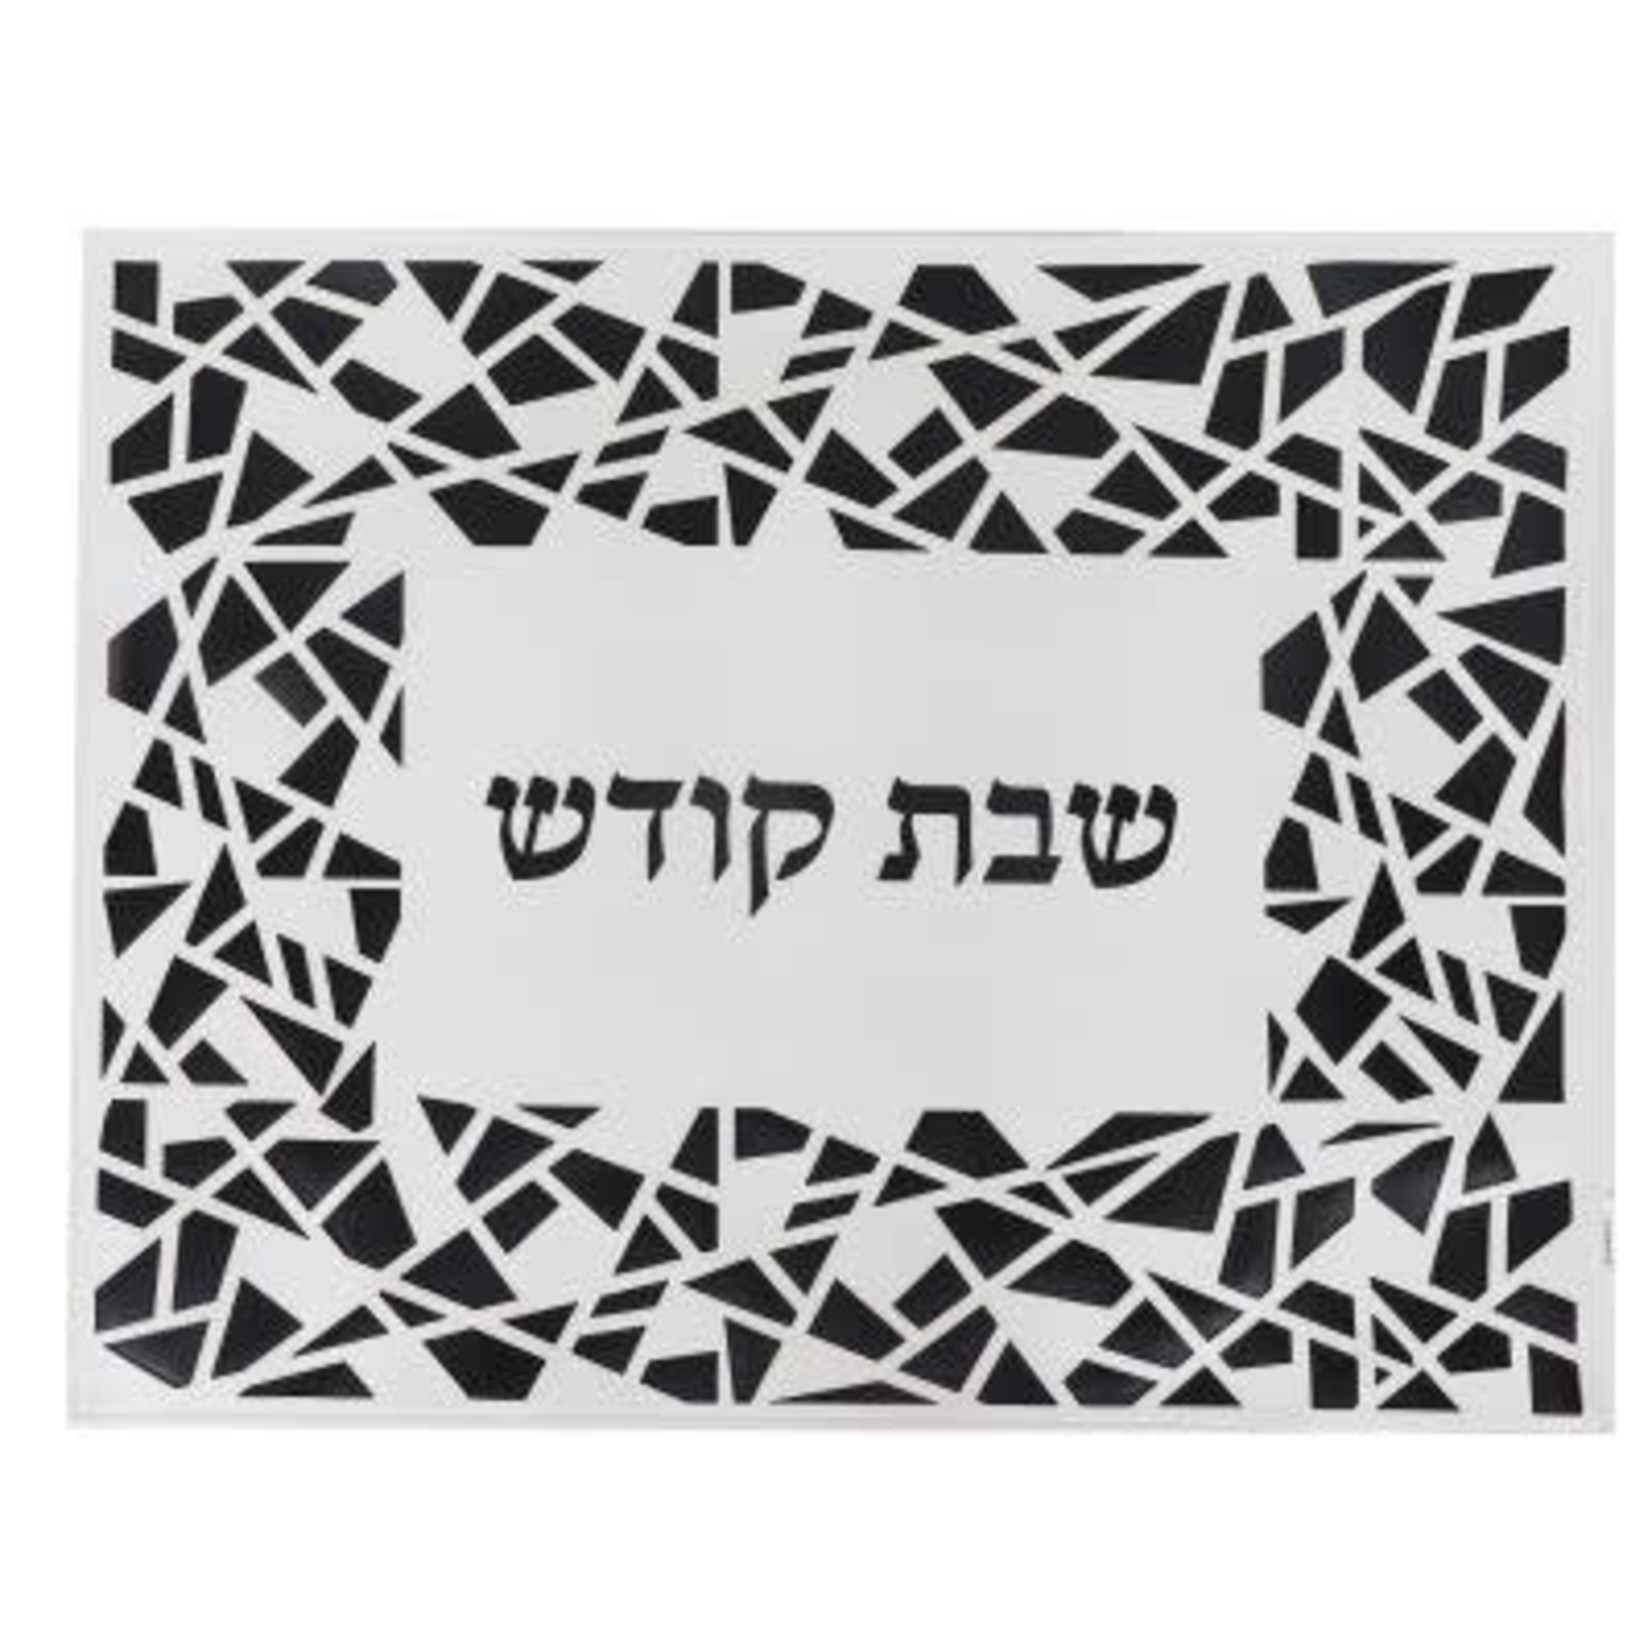 TWS 183111 Leather Look Black & White Framed Challah Cover Laser Cut 17.5" X 21.5"